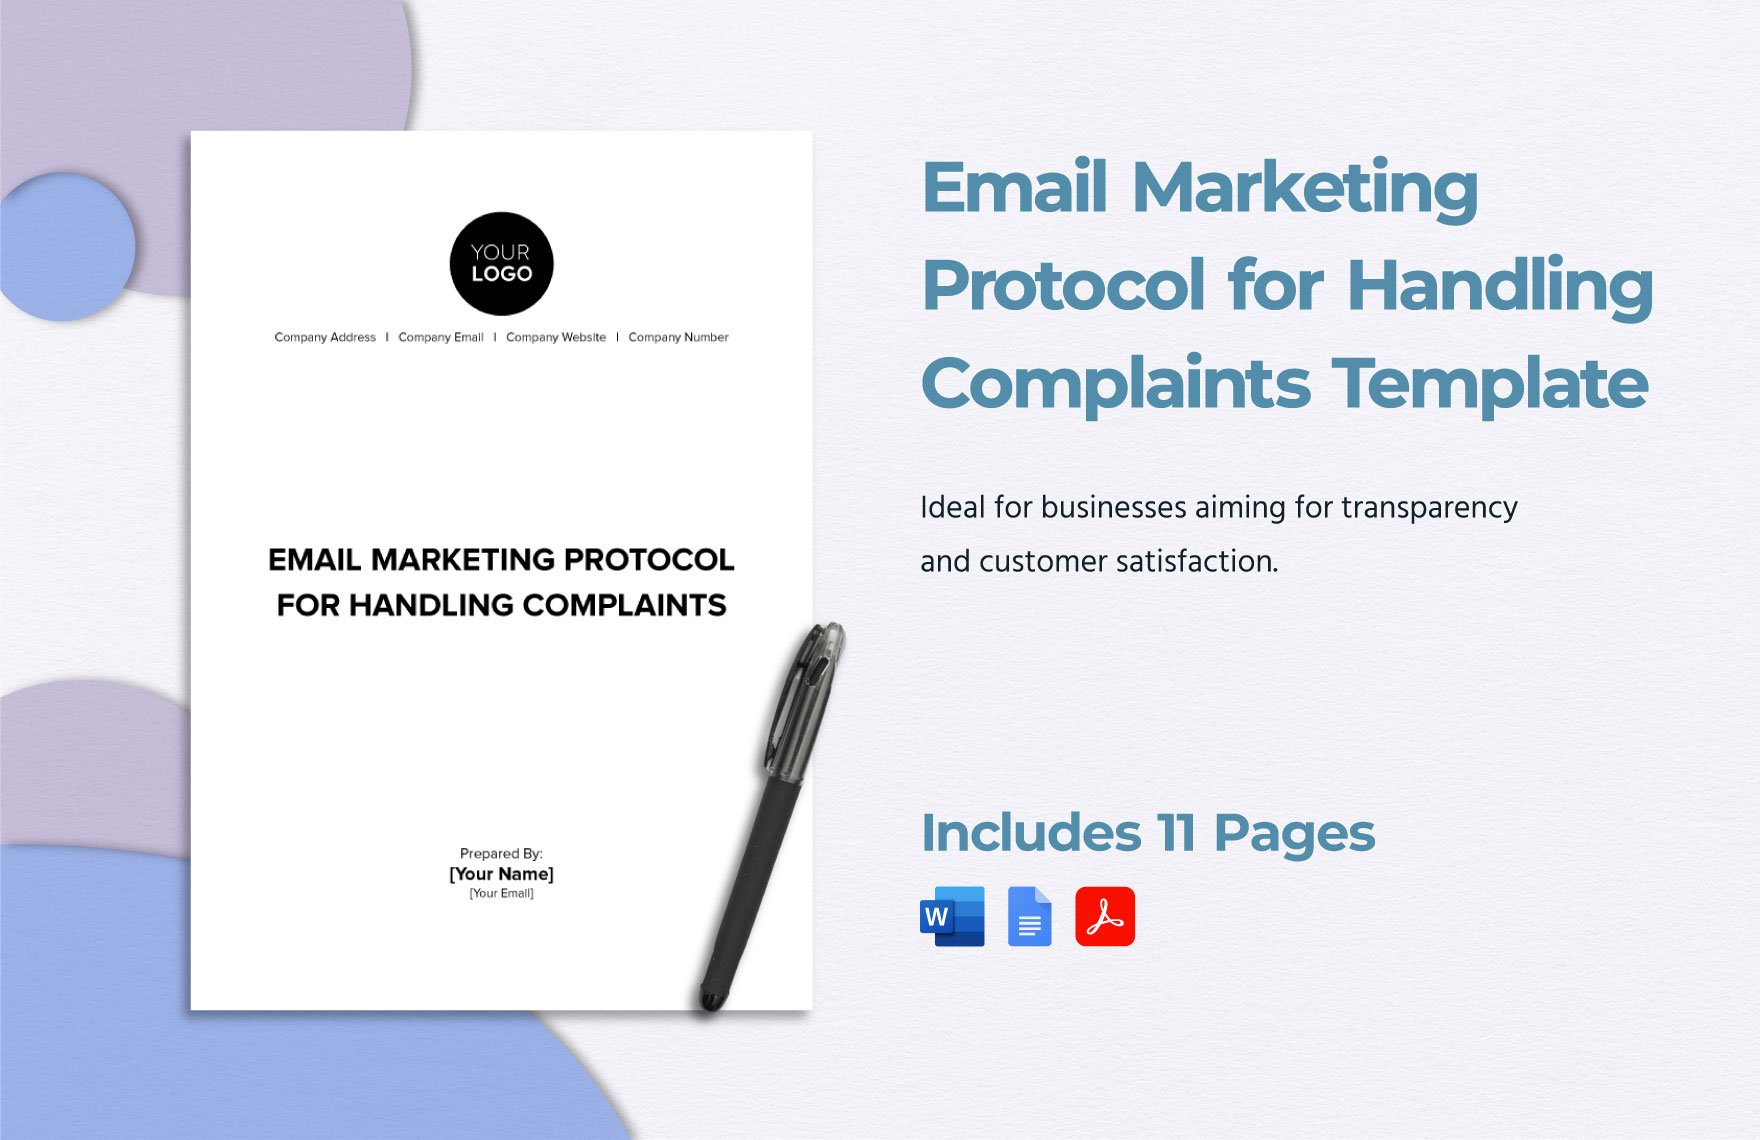 Email Marketing Protocol for Handling Complaints Template